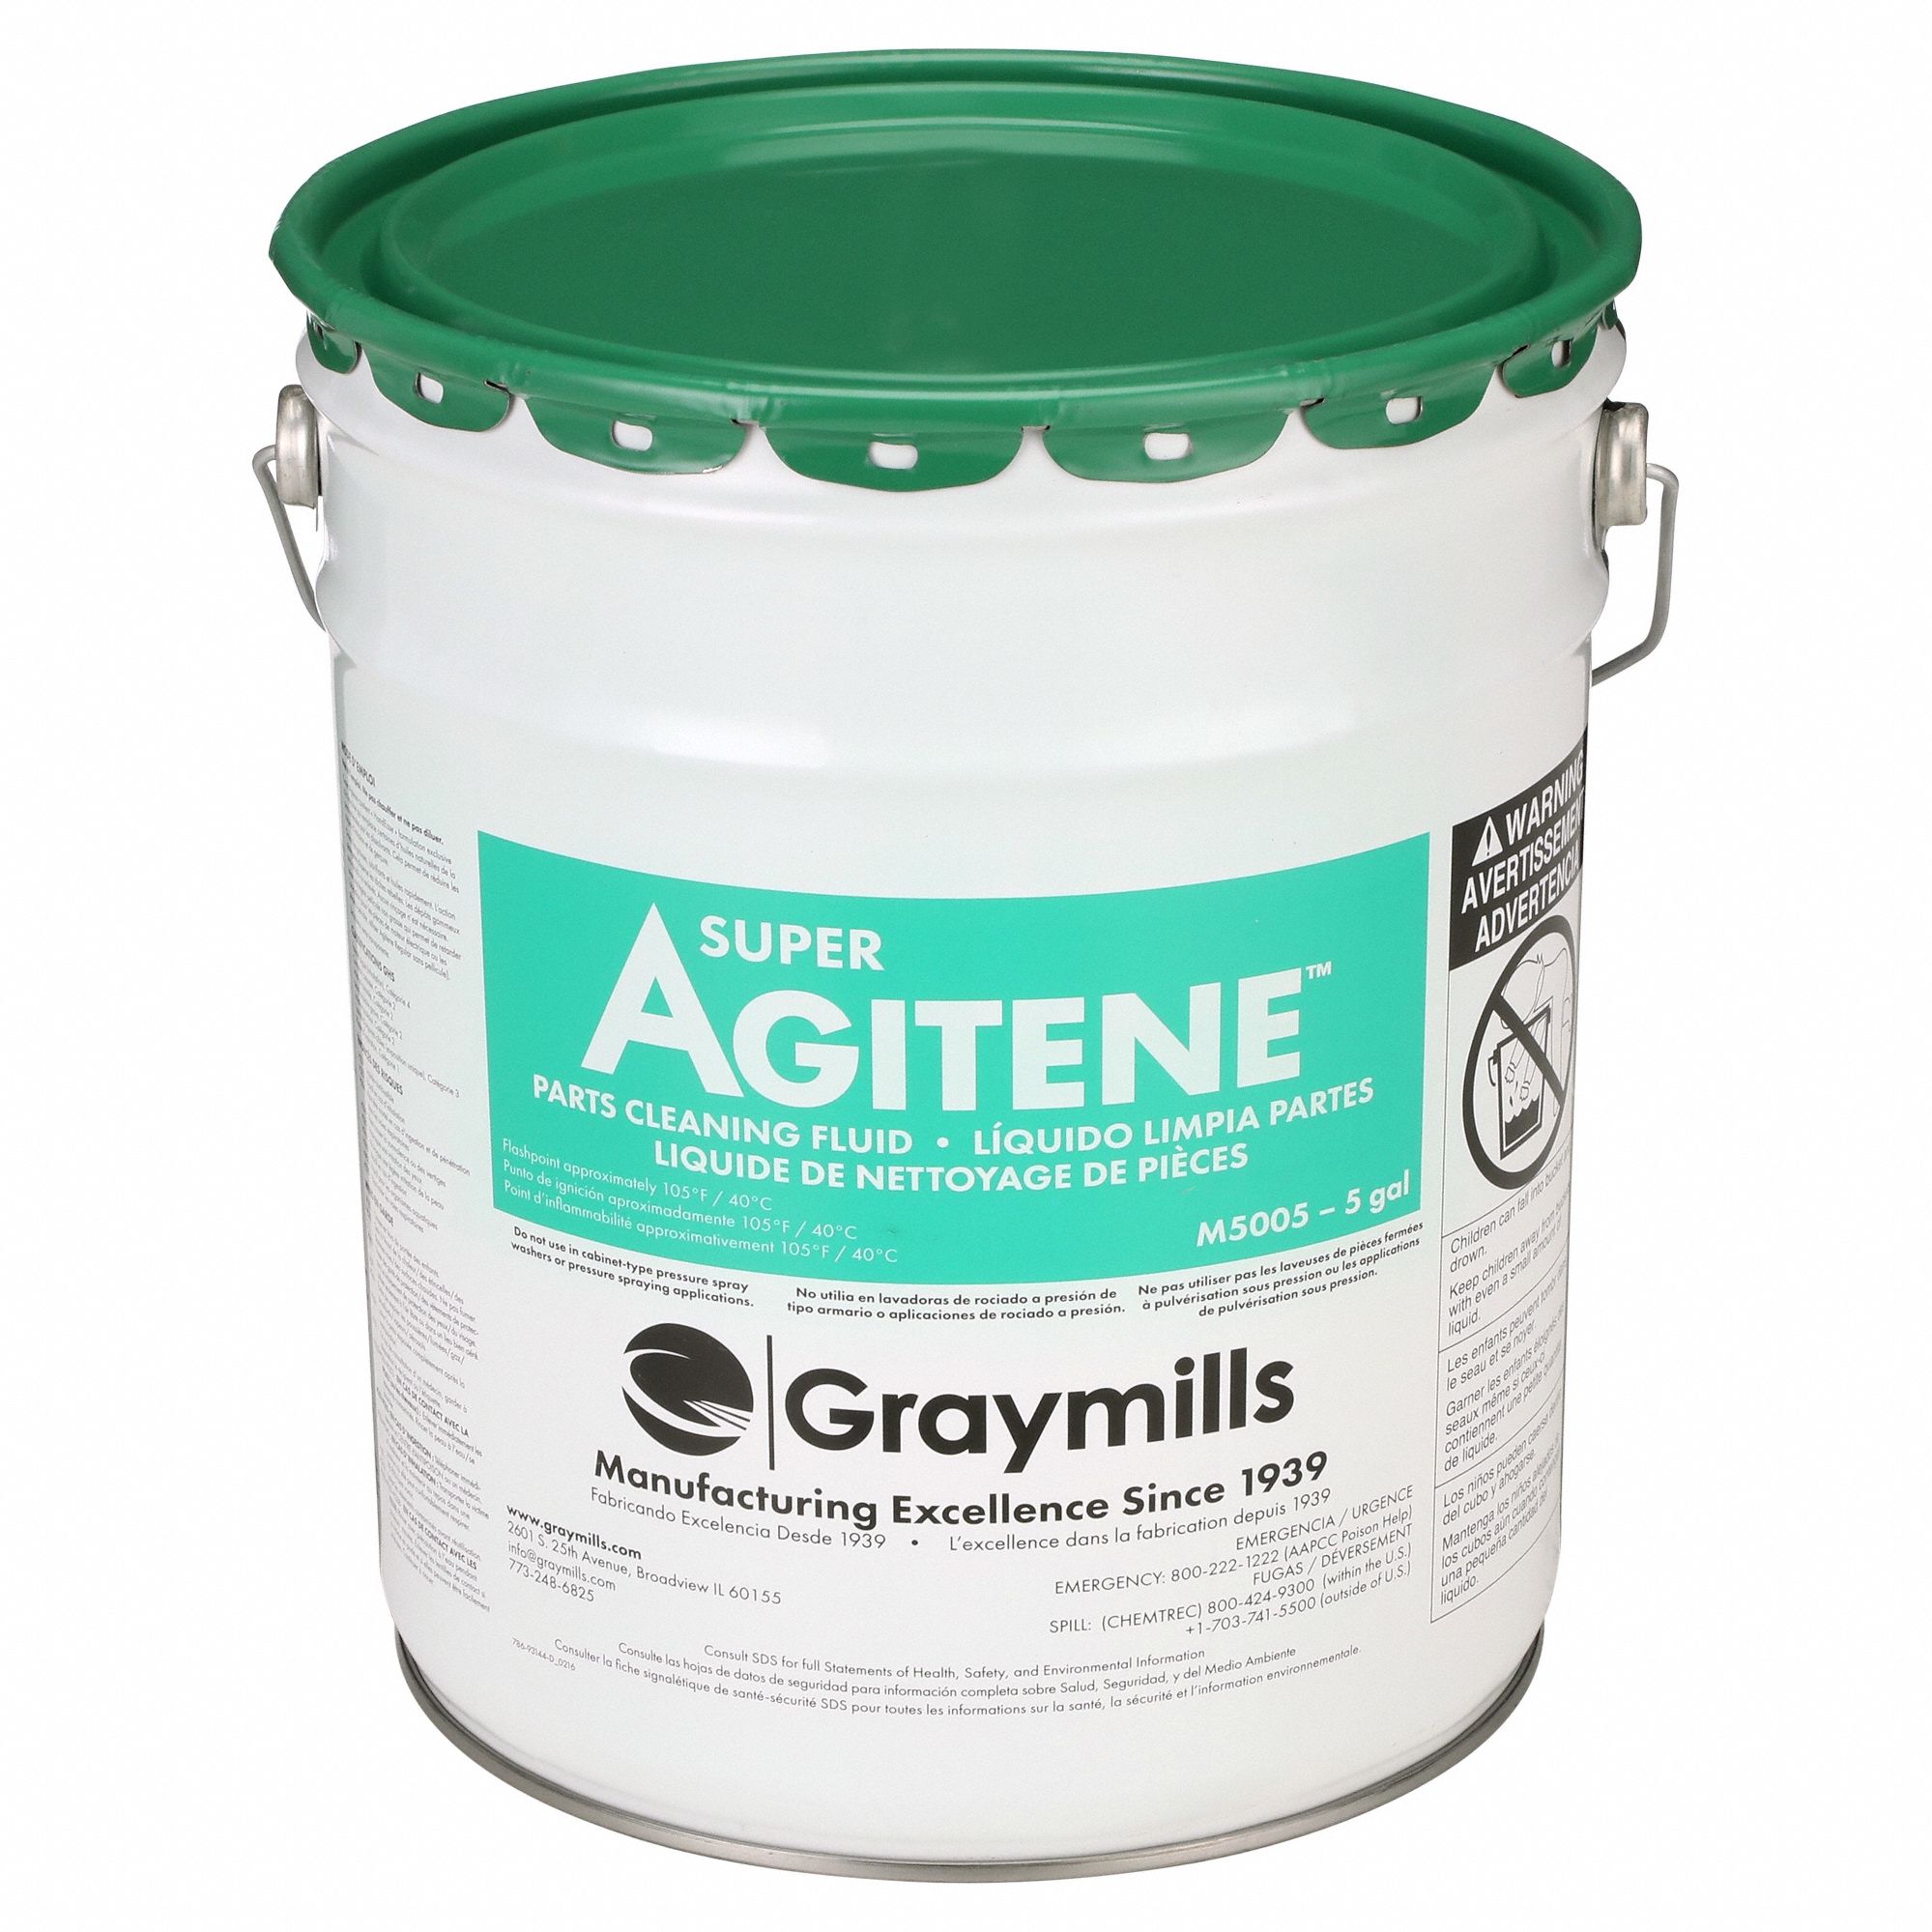 Graymills M2062-141 Cleaning Solvent, 5 gal.